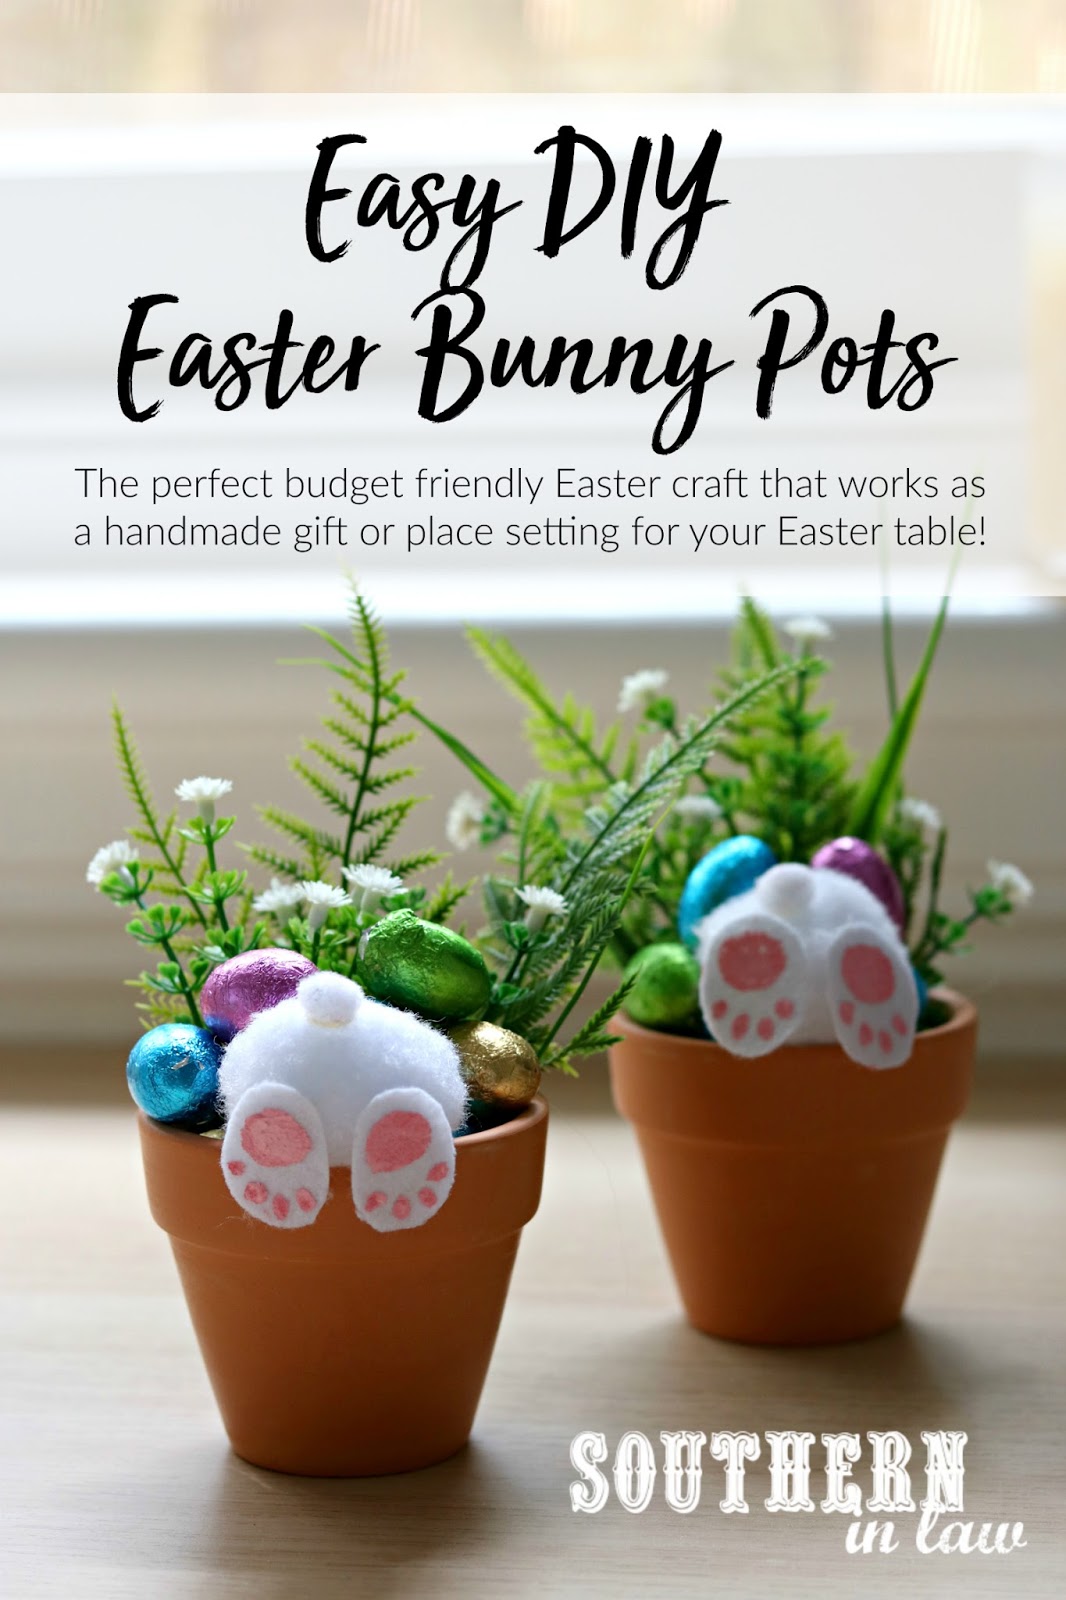 Southern In Law: How to Make Your Own Curious Easter Bunny Pots